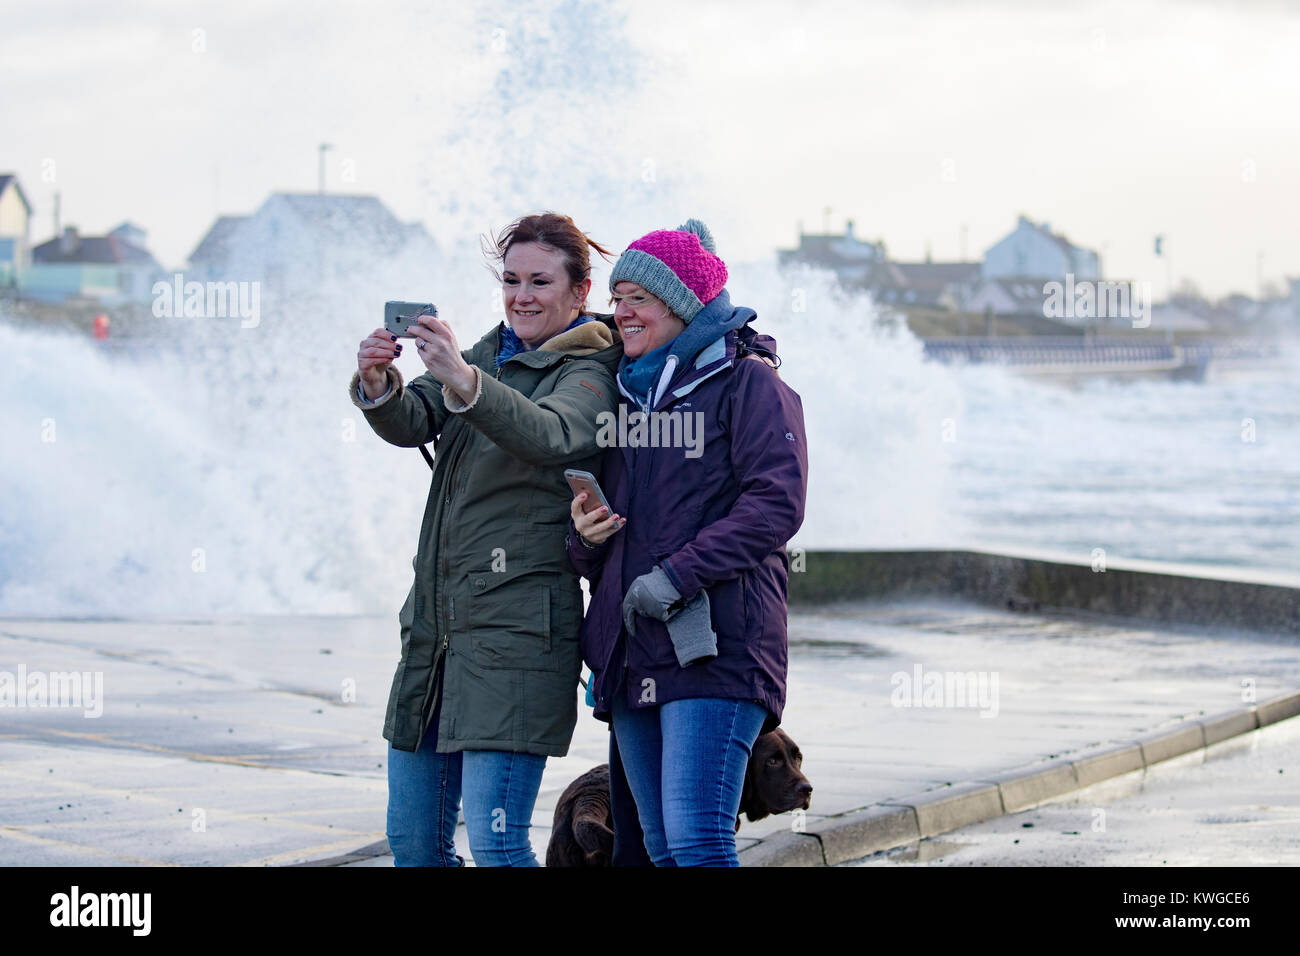 Anglesey, Wales, 3rd January 2018. UK Weather. A severe Met Office warning has been issued for the fifth storm of the UK season named Storm Eleanor. With an increase risk due the current moon state and high tides flood warnings are in place for many areas along with gales force winds likely to cause harm. Huge waves and winds crash into Trearddur Bay on Anglesey in North Wales but still time for a selfie as waves crash behind these friends on the seafront © DGDImages/Alamy Live News Stock Photo